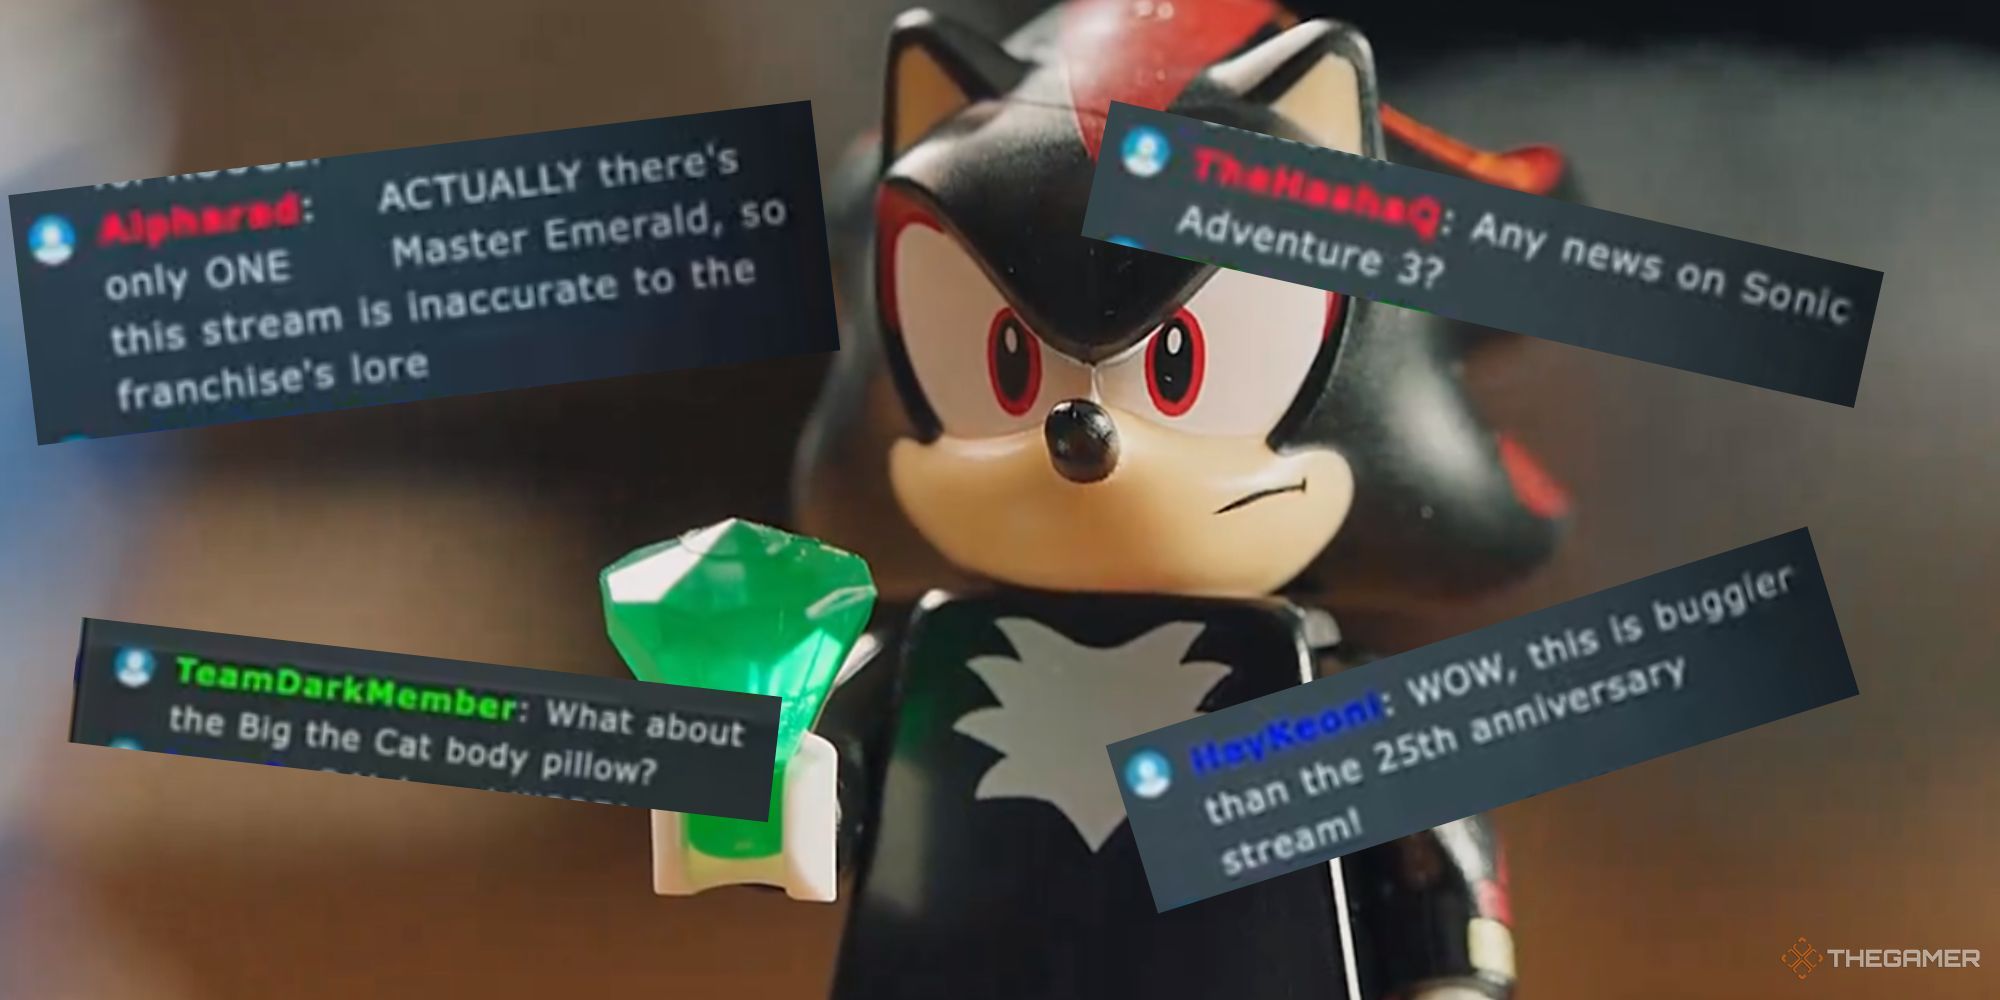 An image of the Shadow lego figure, surronded by fake livestream comments asking for Sonic Adventure 3, getting upset about a lore inaccuracy, complaining about the livestream, and asking for a Big the Cat body pillow